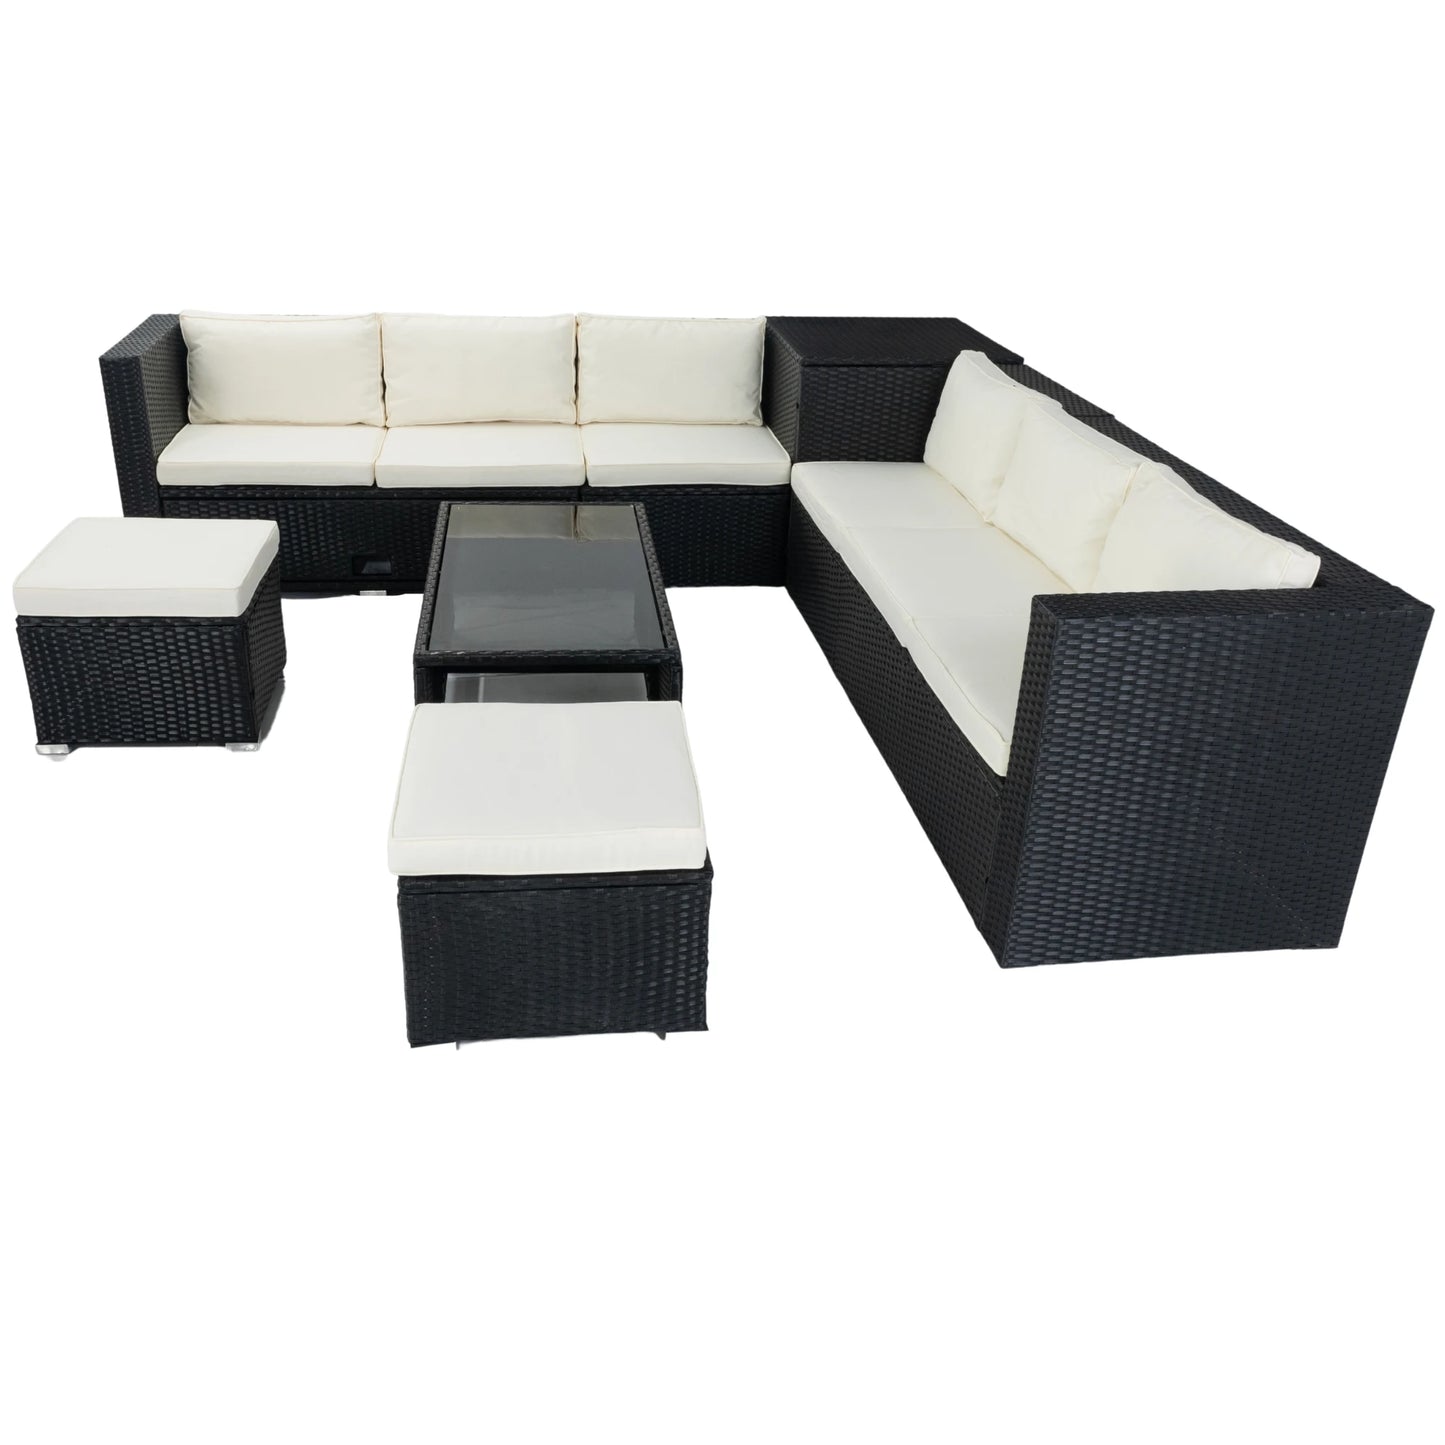 8 Piece Patio Sectional Wicker Rattan Outdoor Furniture Sofa Set with One Storage Box Under Seat and Cushion Box